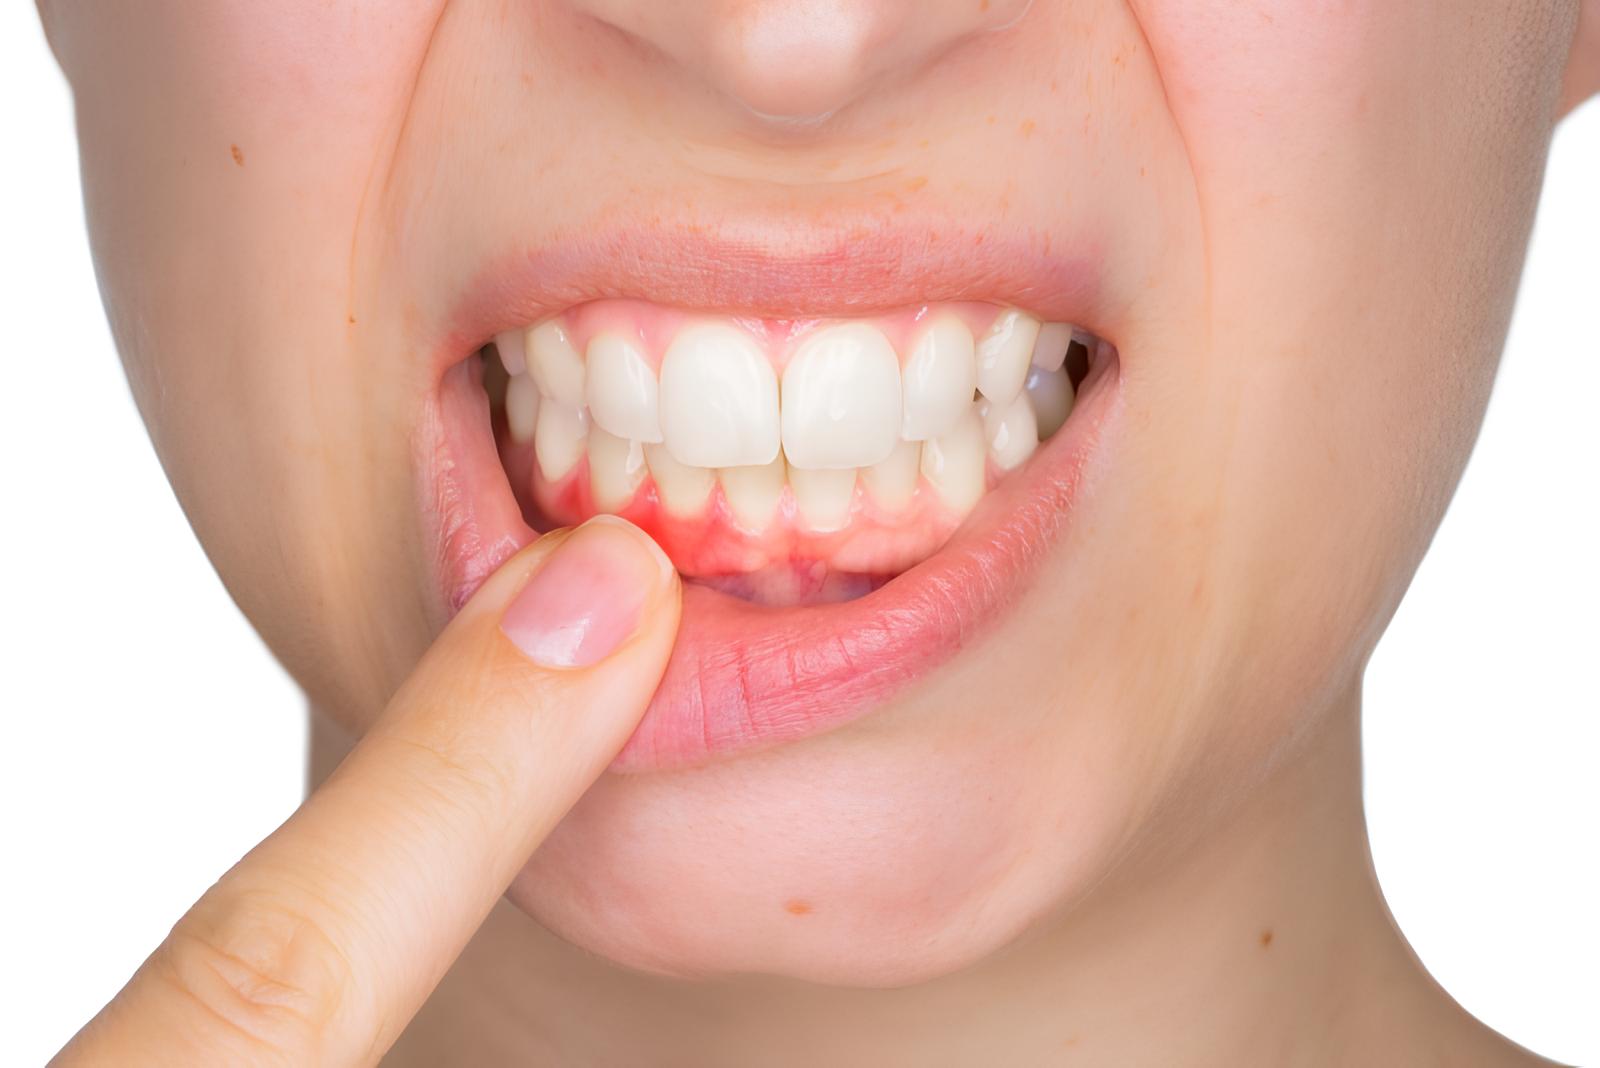 Signs of Developing Gum Diseases